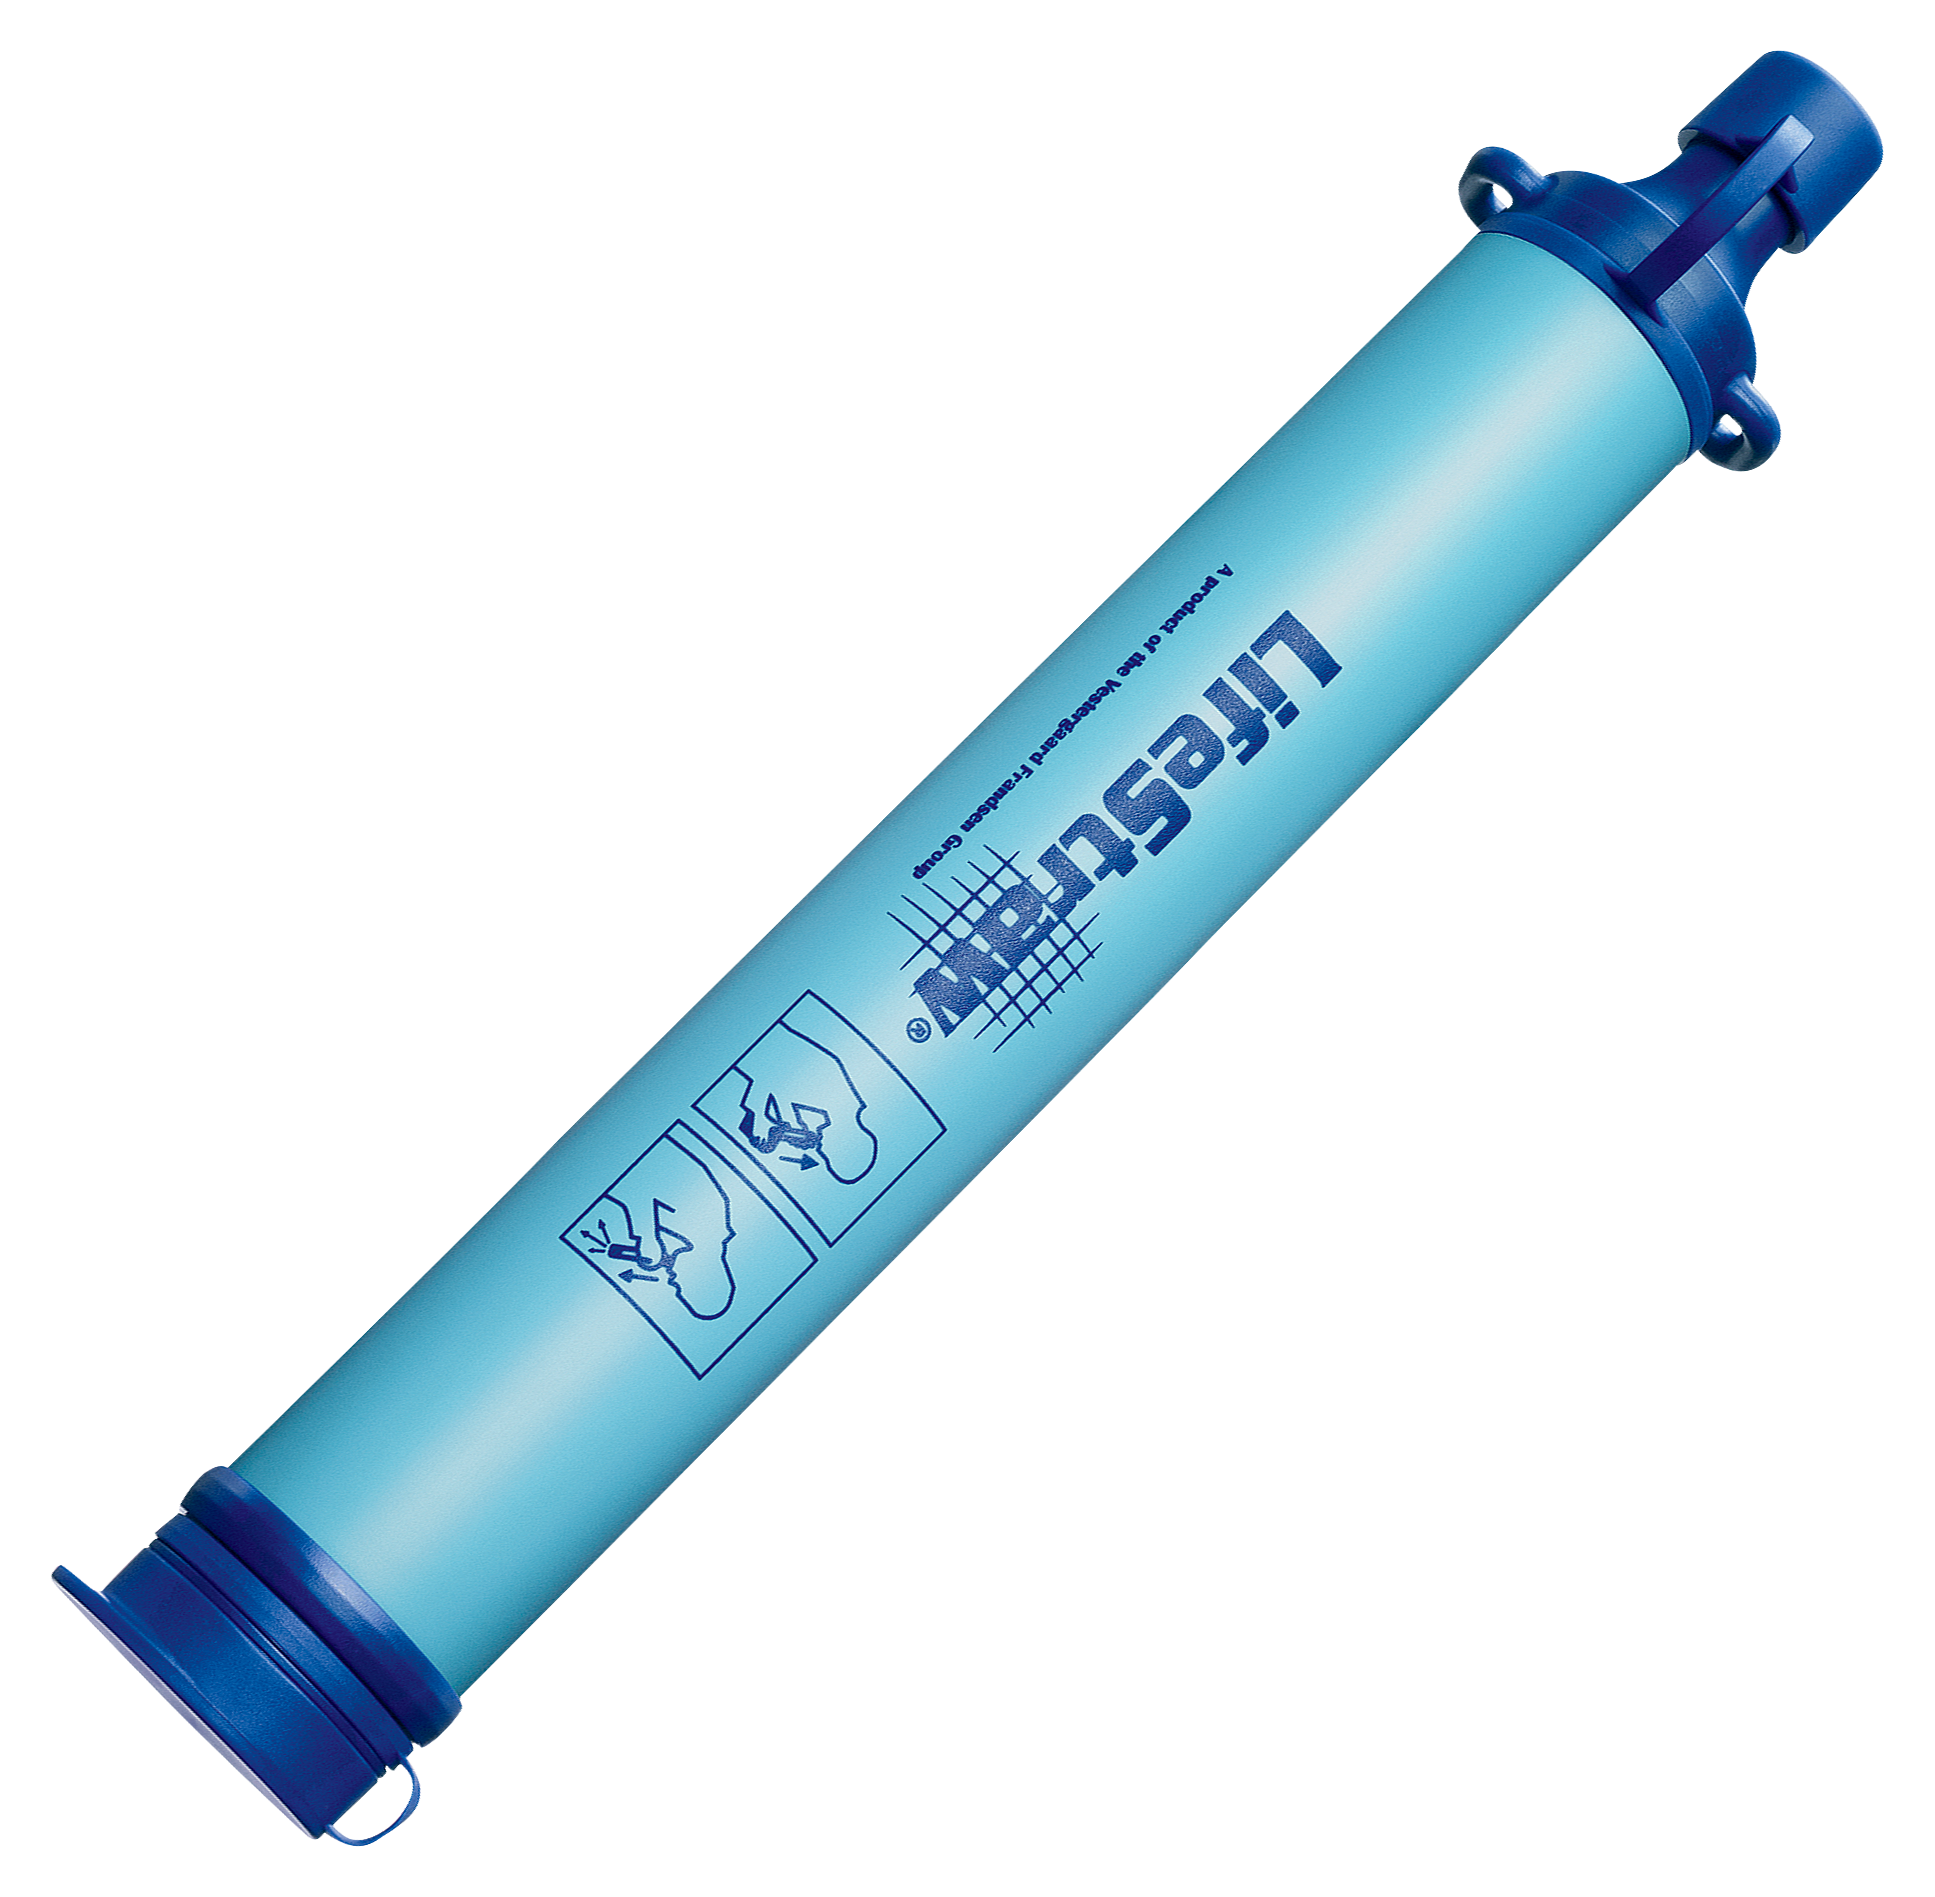 Find Excellent Life Straw On Offer 